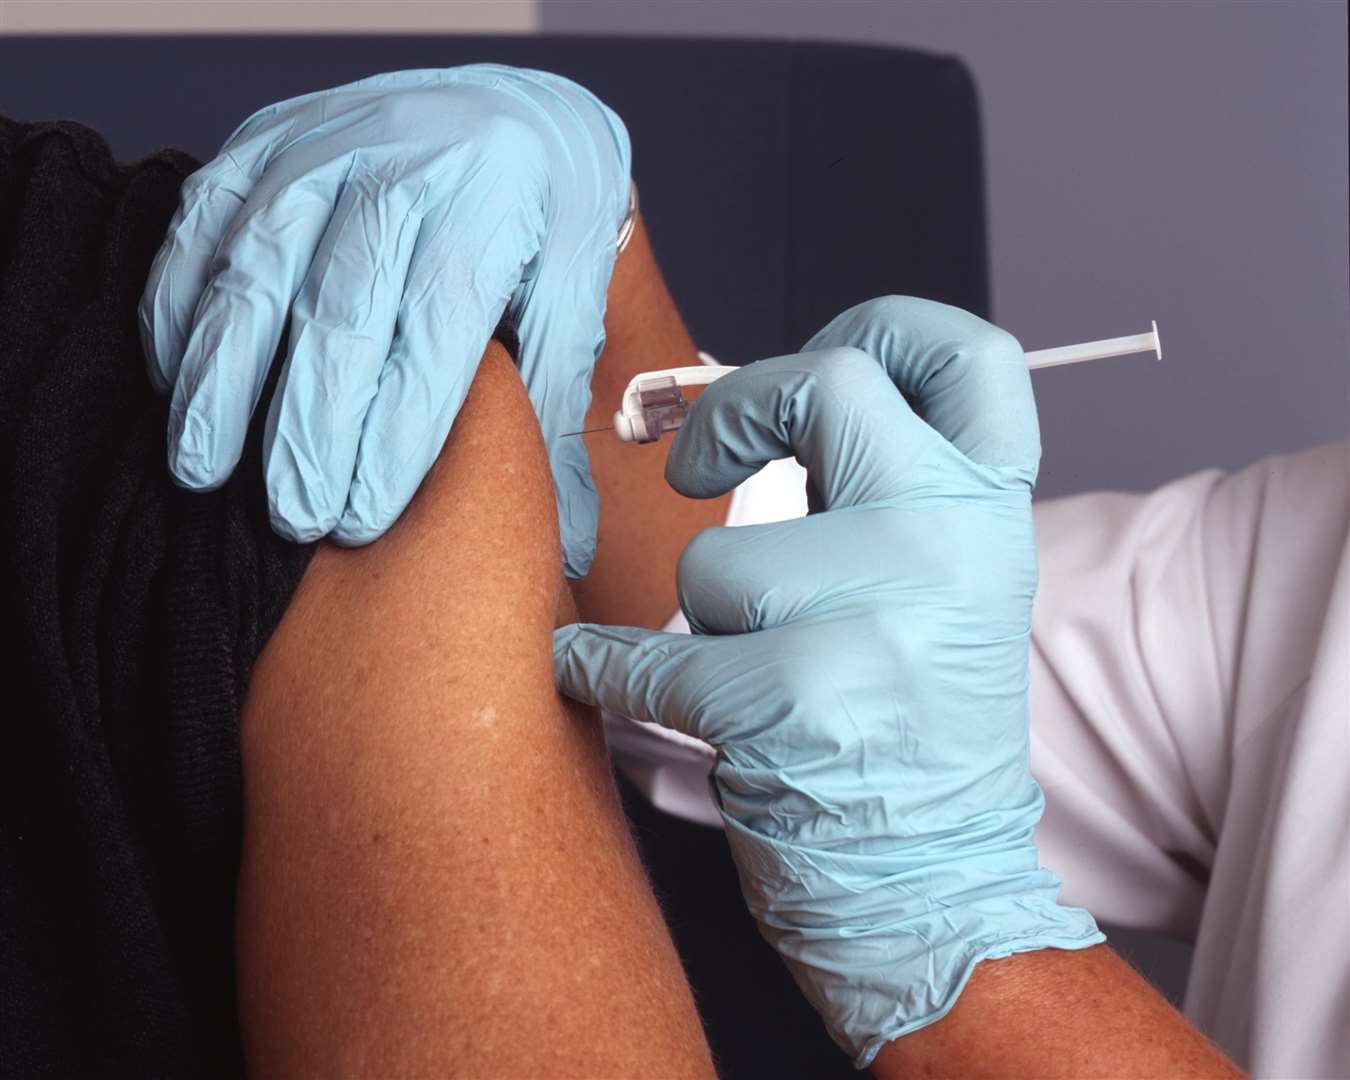 The delay will allow 10 million more second doses of the vaccine to be administered. Picture: iStock